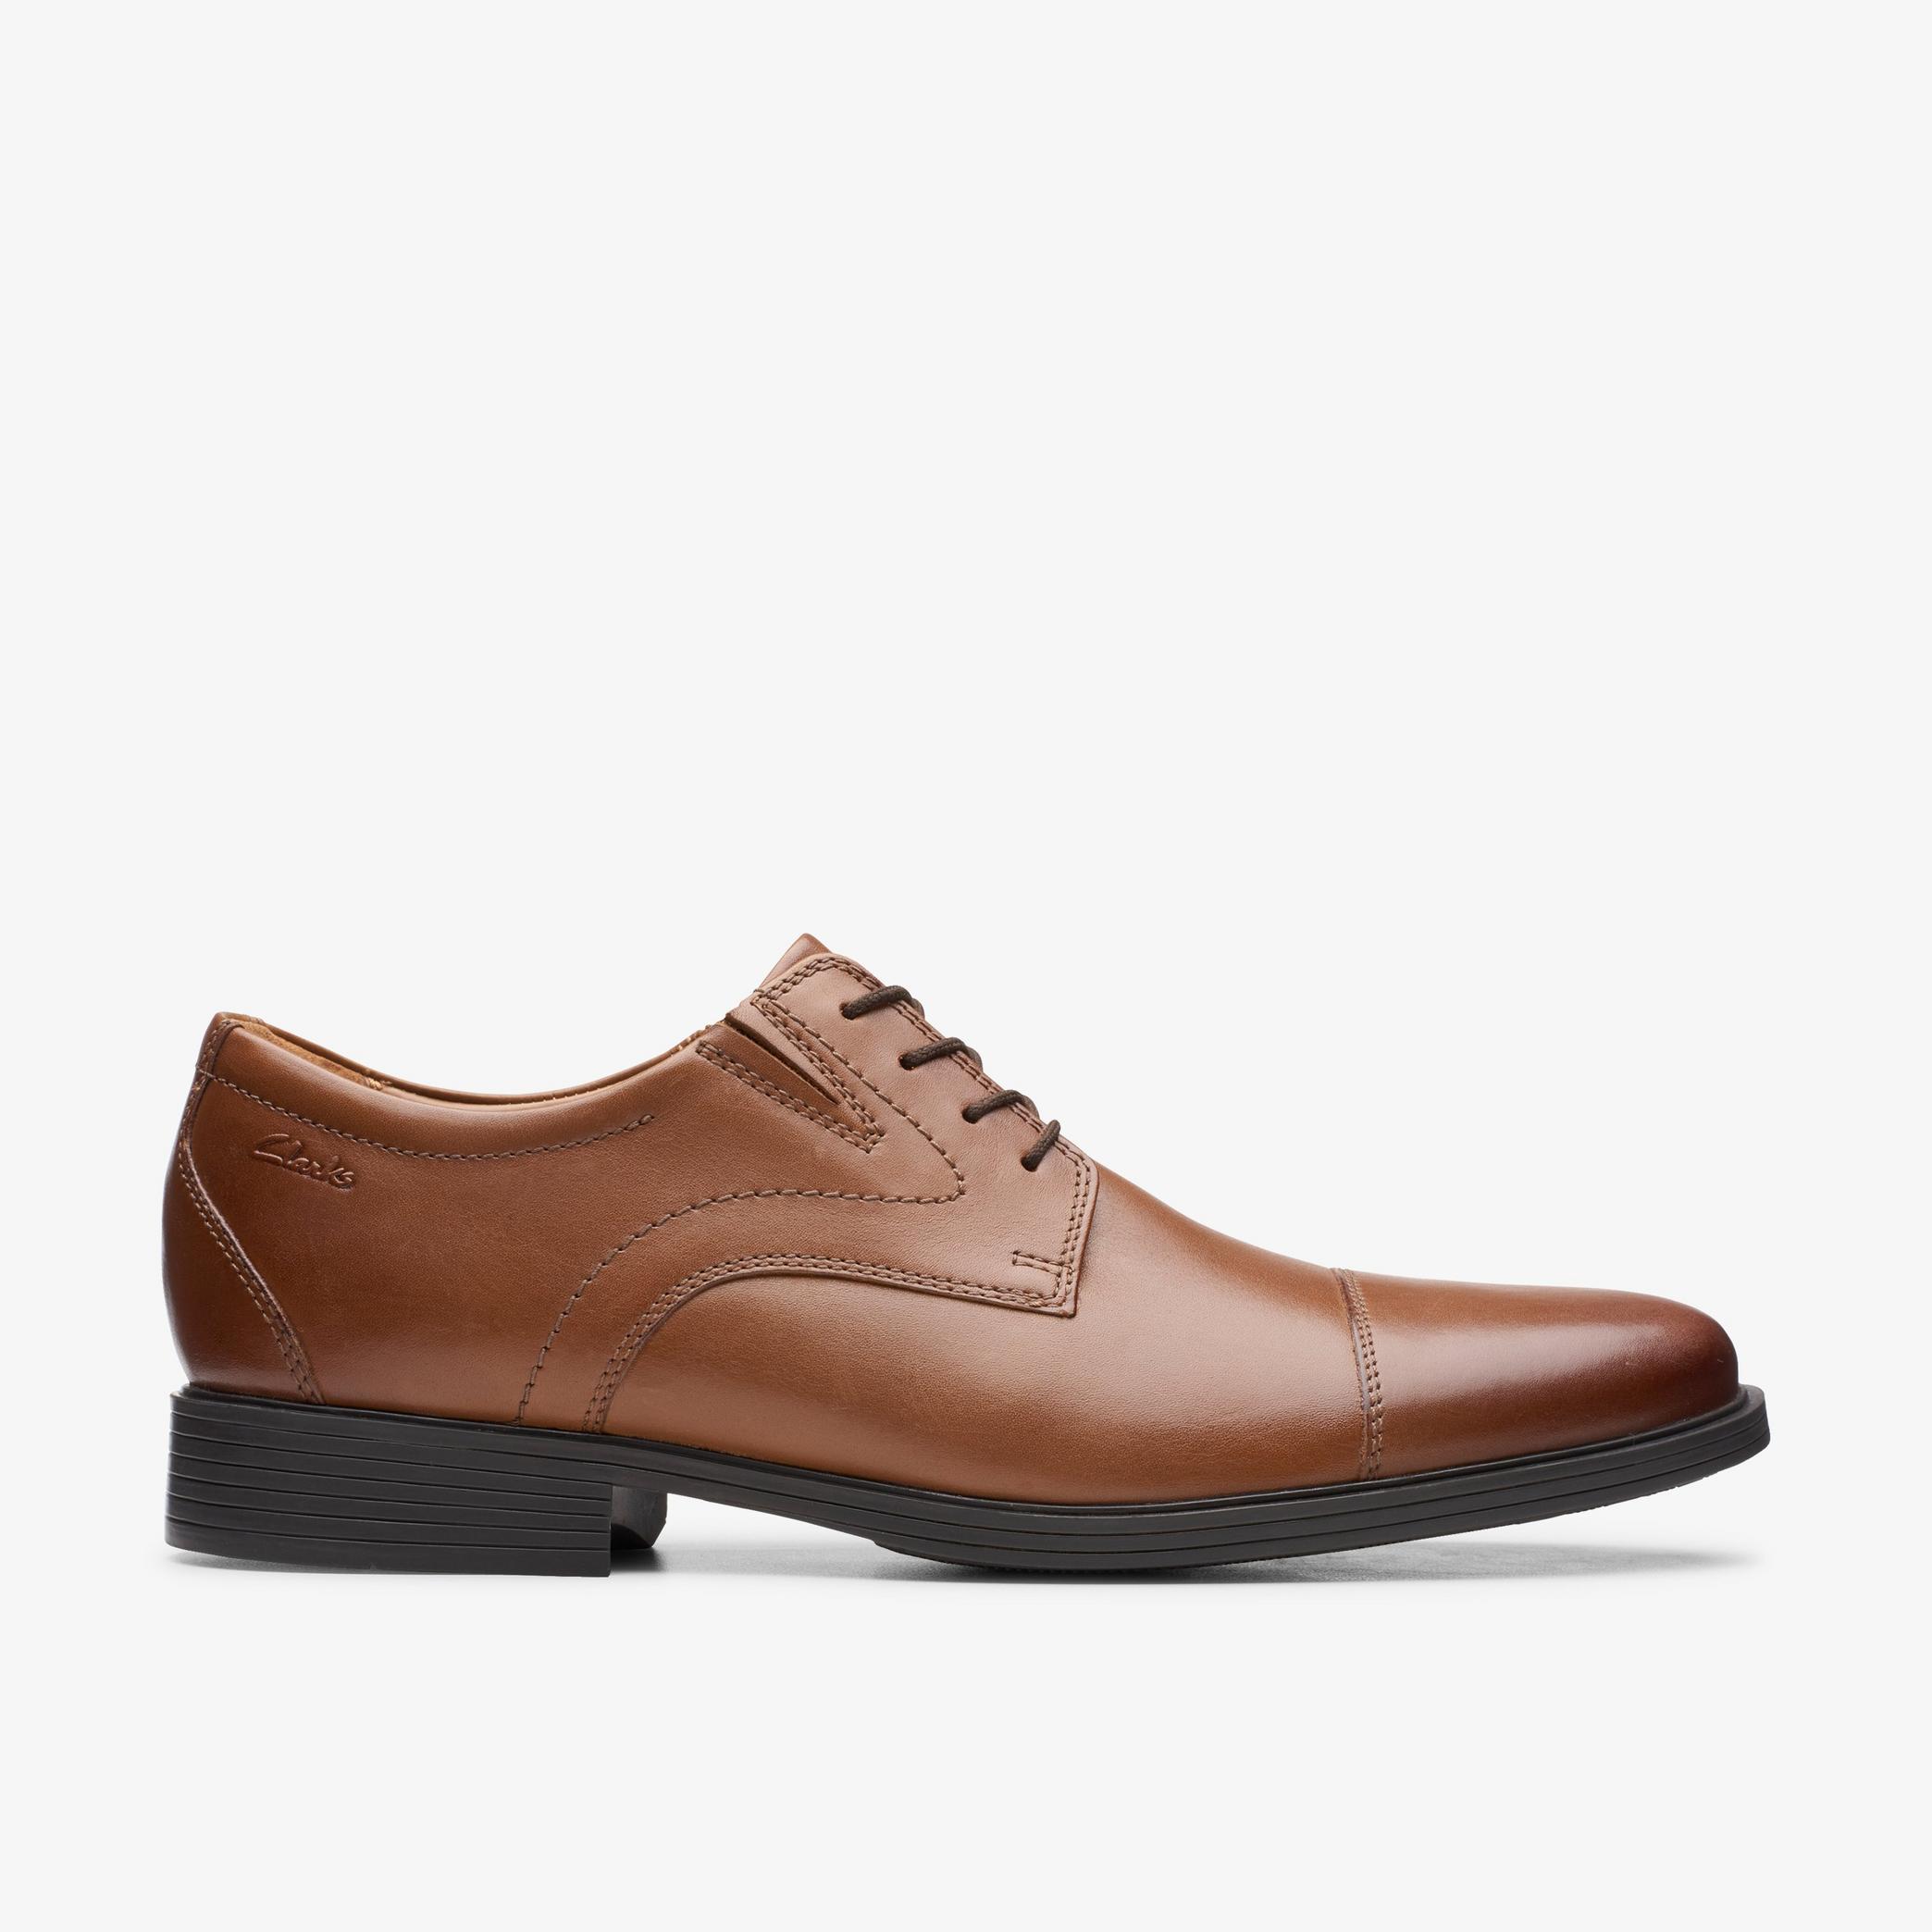 Whiddon Cap Dark Tan Leather Oxford Shoes, view 1 of 6